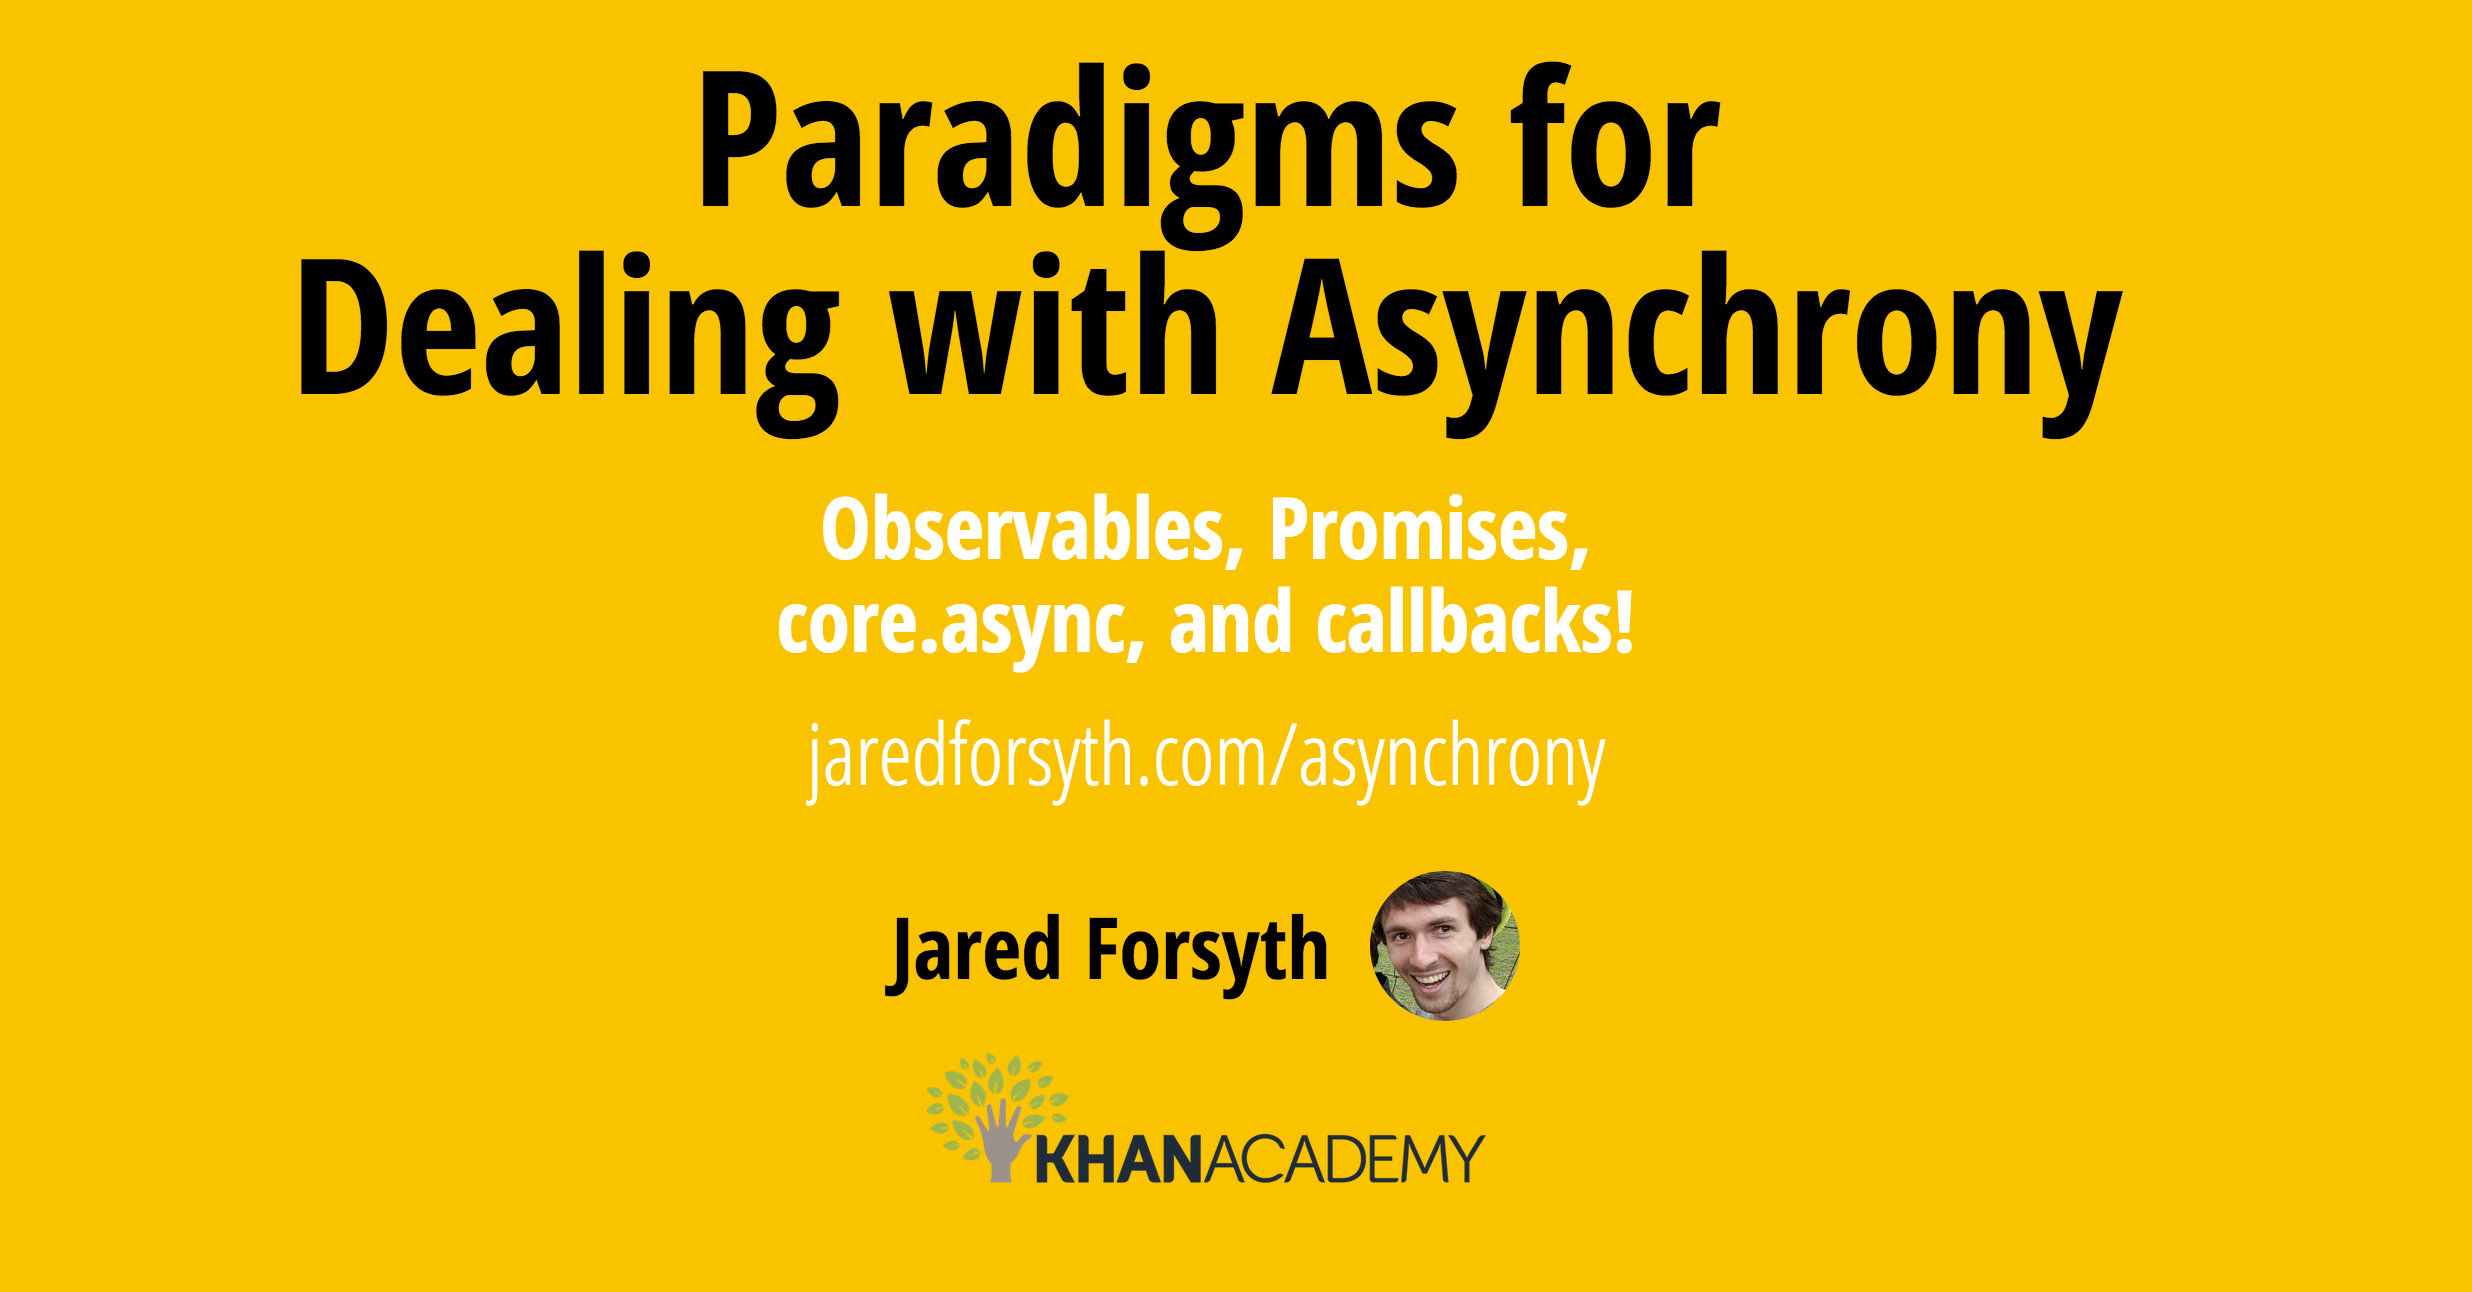 Paradigms for dealing with asynchrony